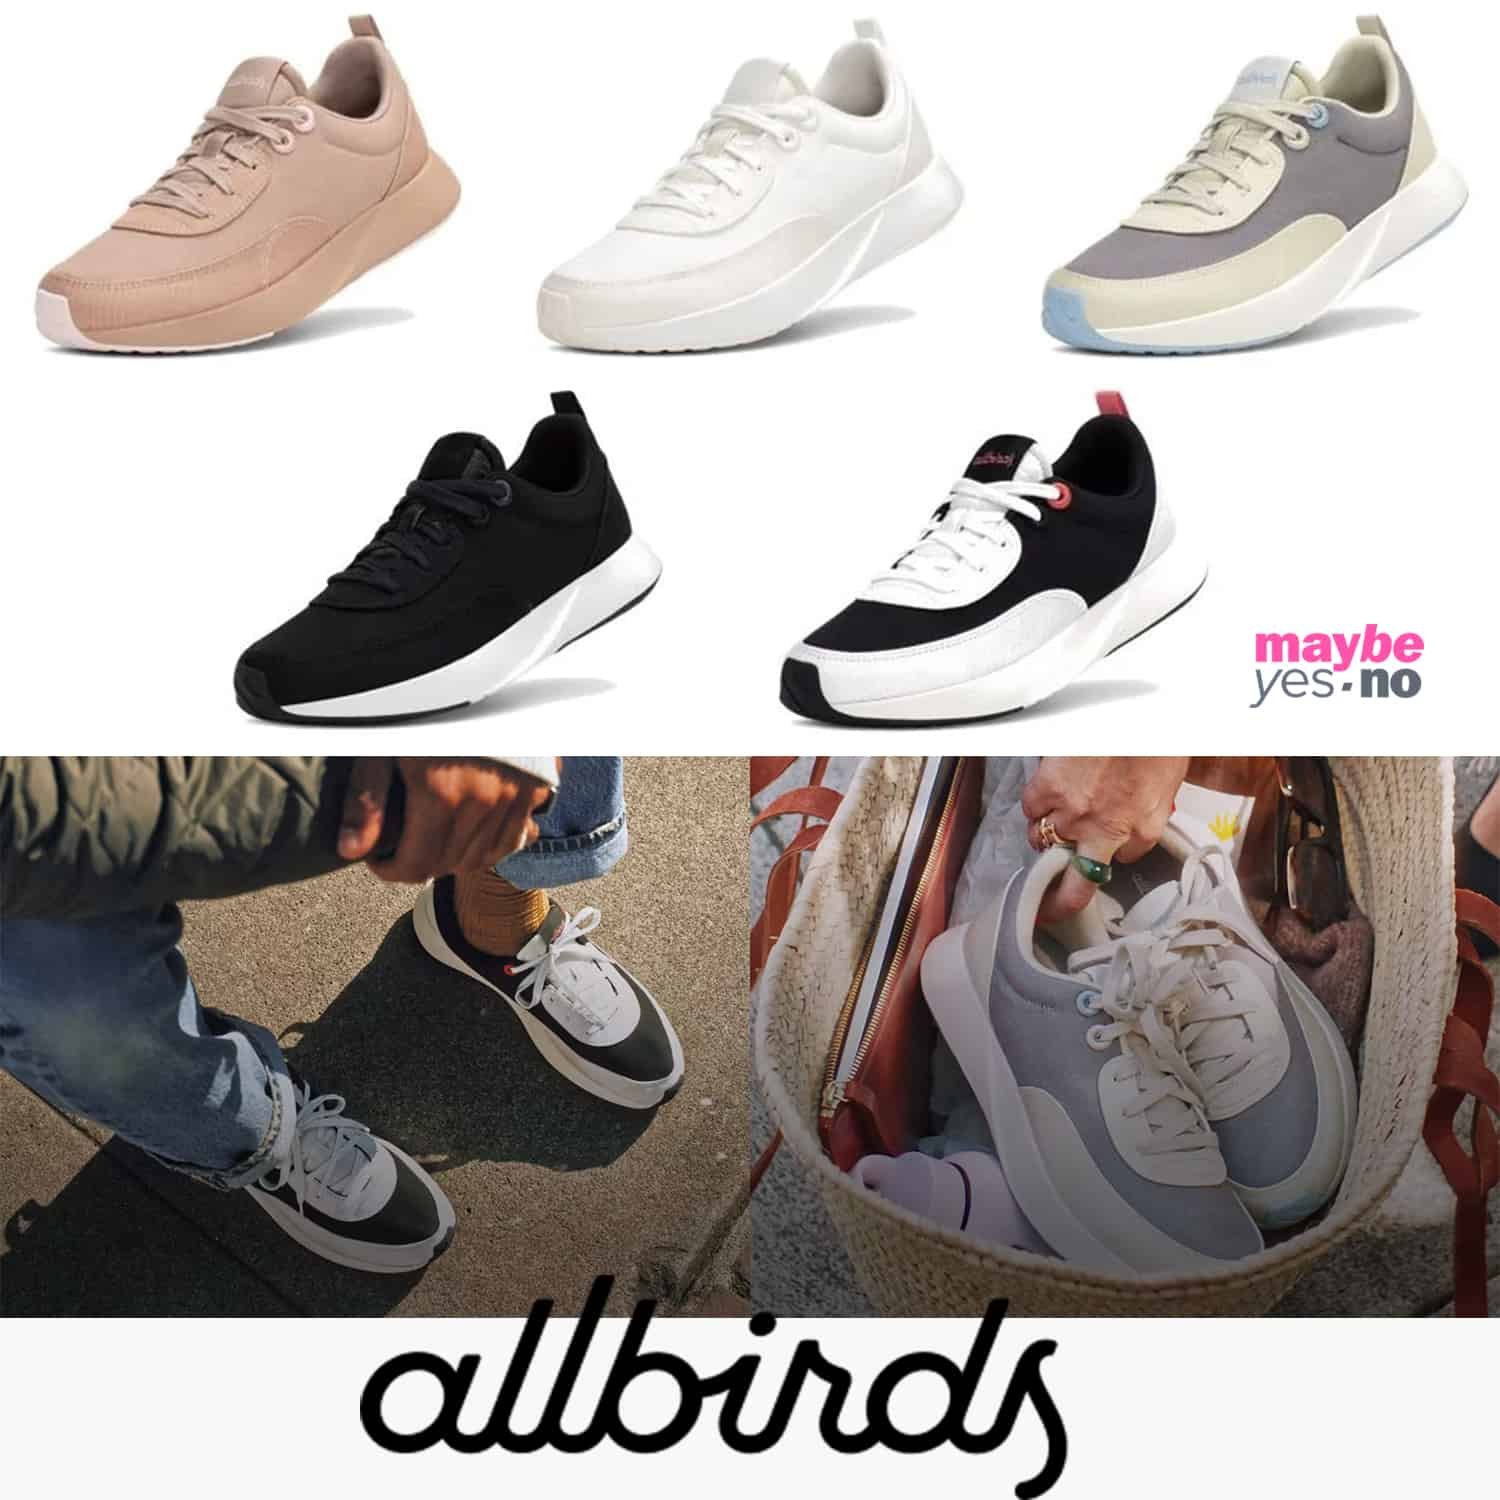 Allbirds Launches Courier - A New Casual, Everyday Shoe — MAYBE.YES.NO ...